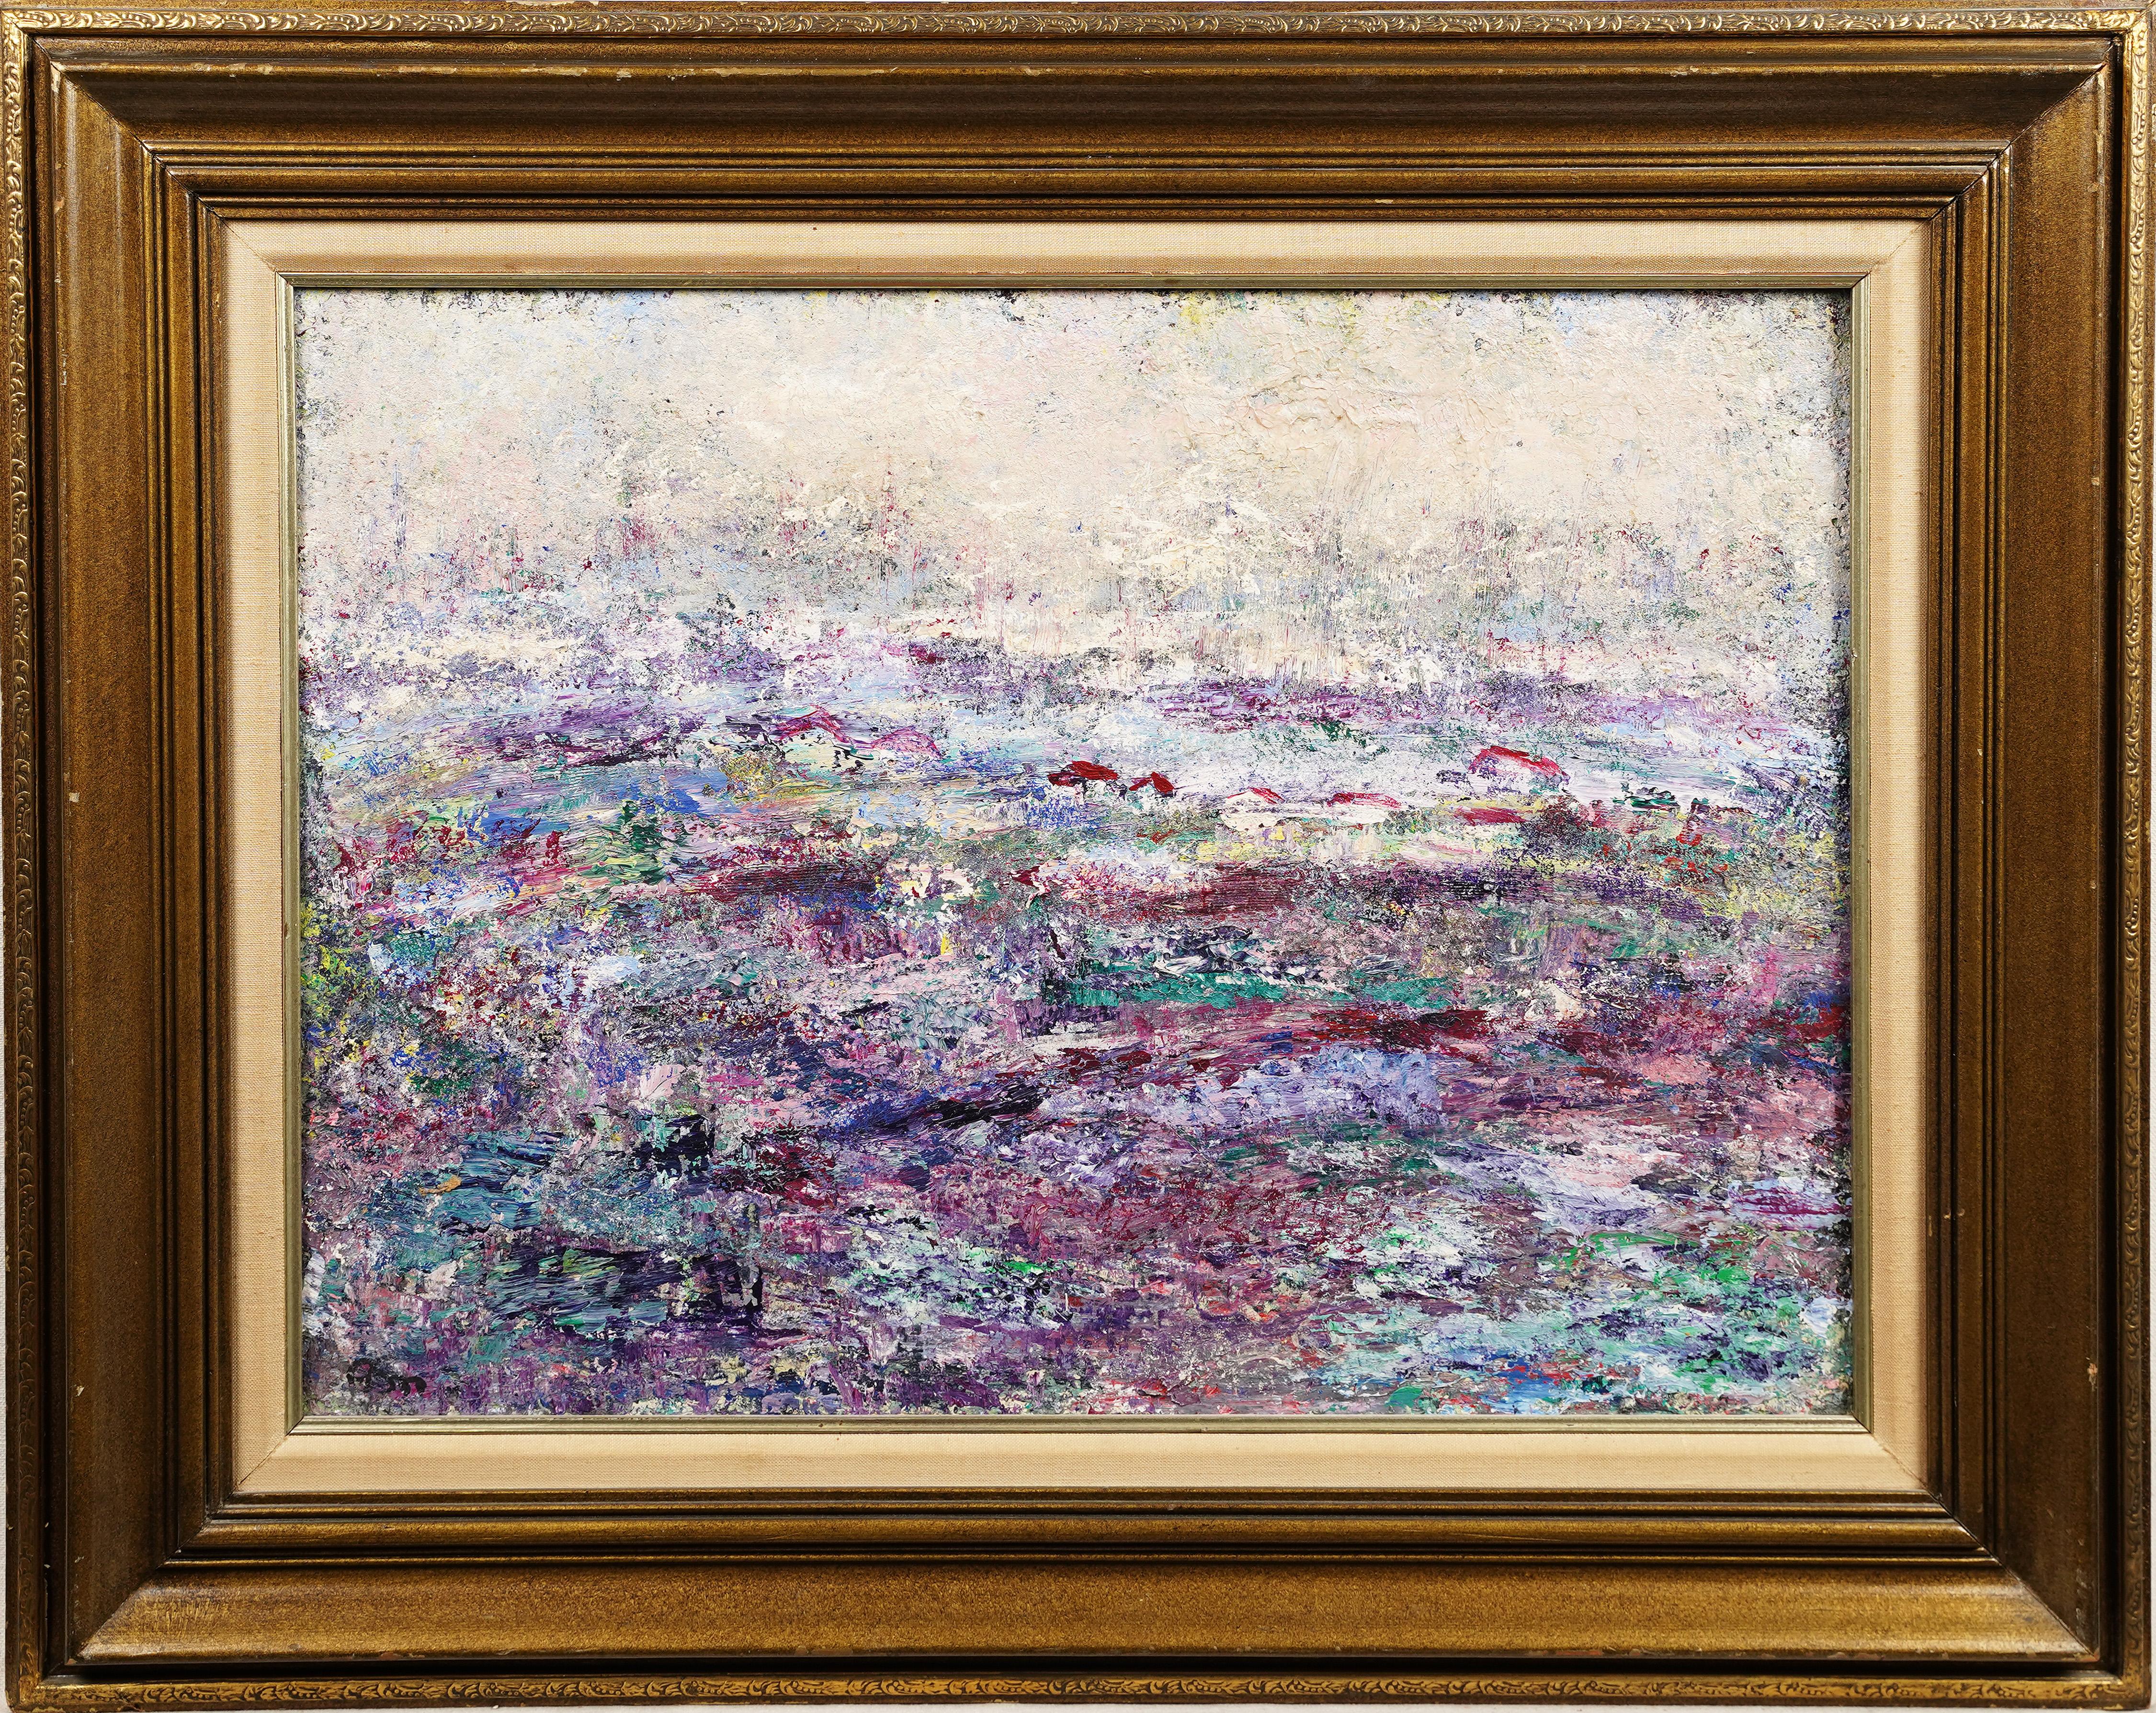 Antique European flower field oil painting.  Oil on canvas.  Signed.  Framed.  Image size, 24L x 18H.